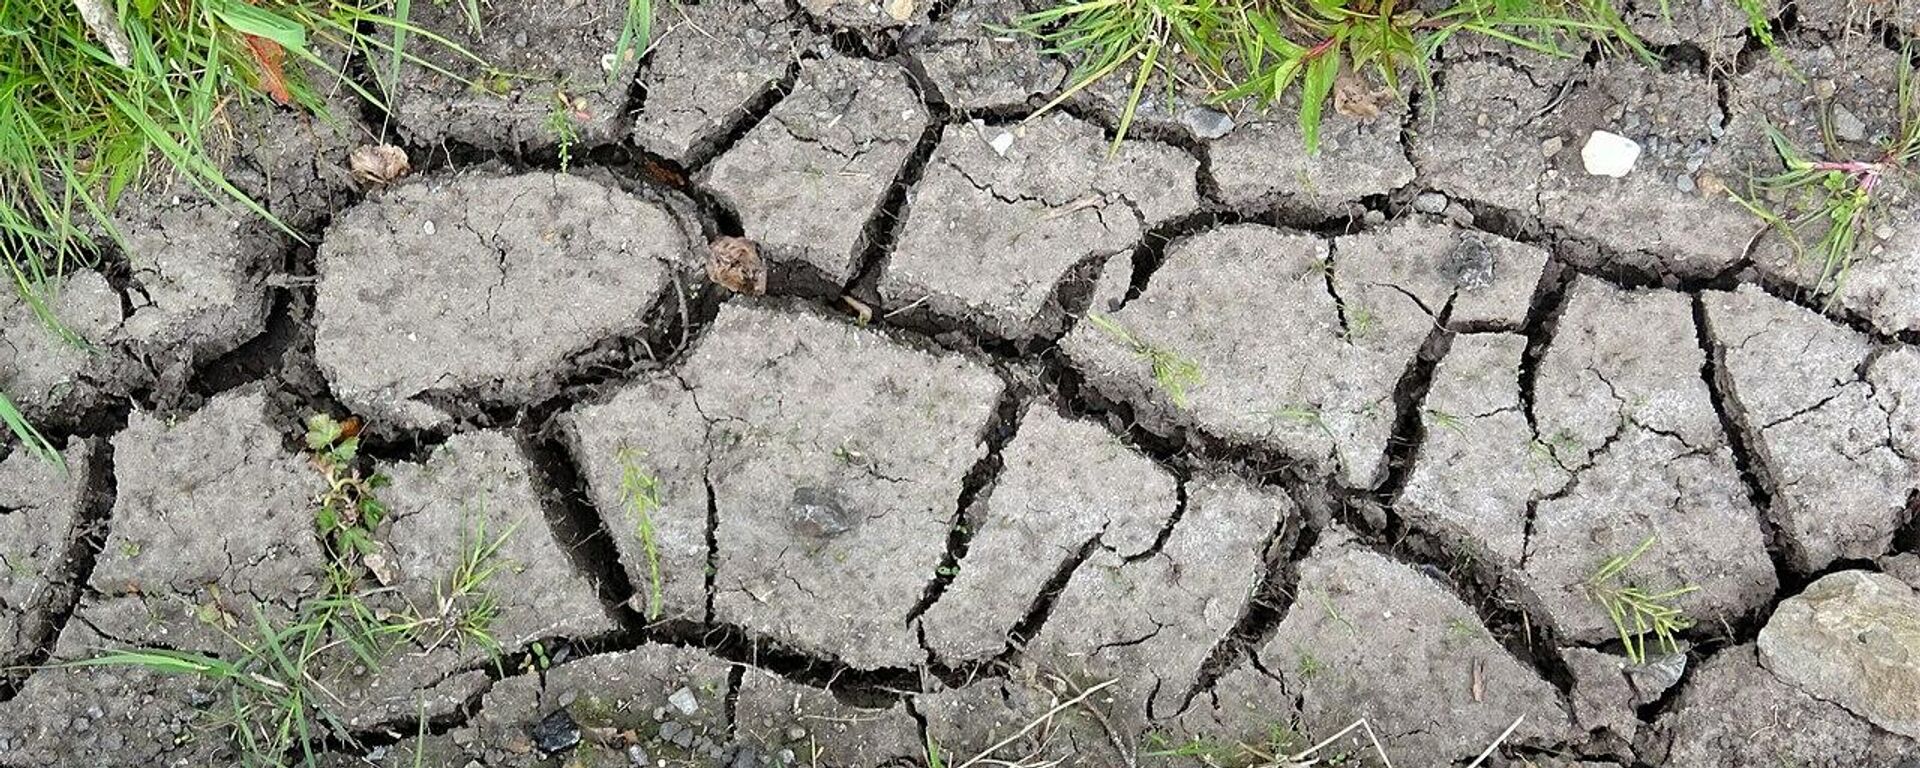 Cracked earth in a ditch after prolonged drought. 2020. Kilmaurs parish - Sputnik International, 1920, 25.07.2022